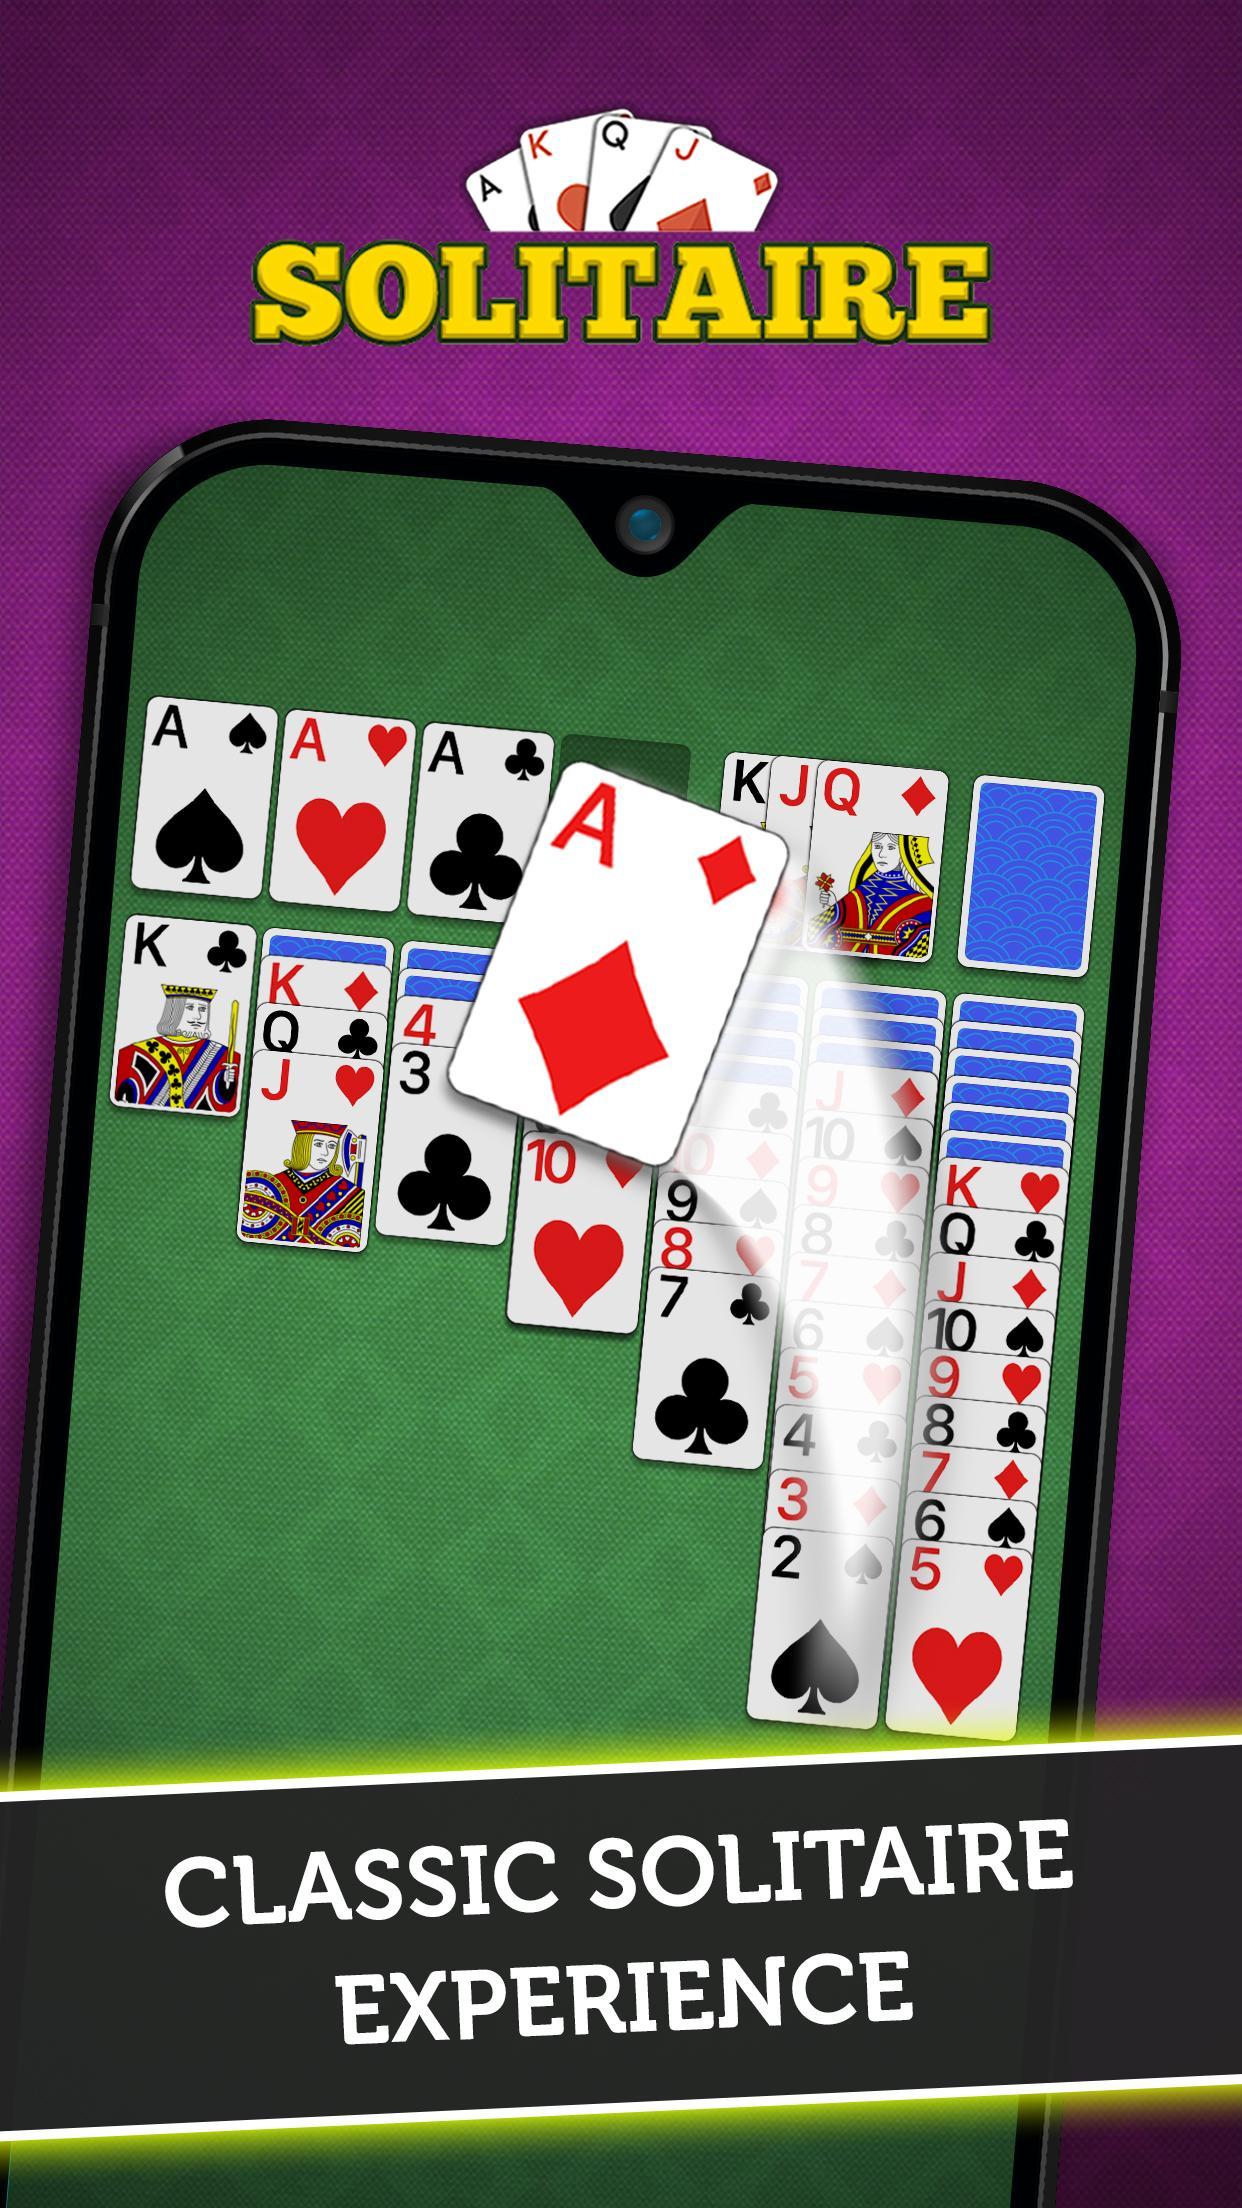 Classic Solitaire 2020 - Free Card Game 1.152.0 Screenshot 1